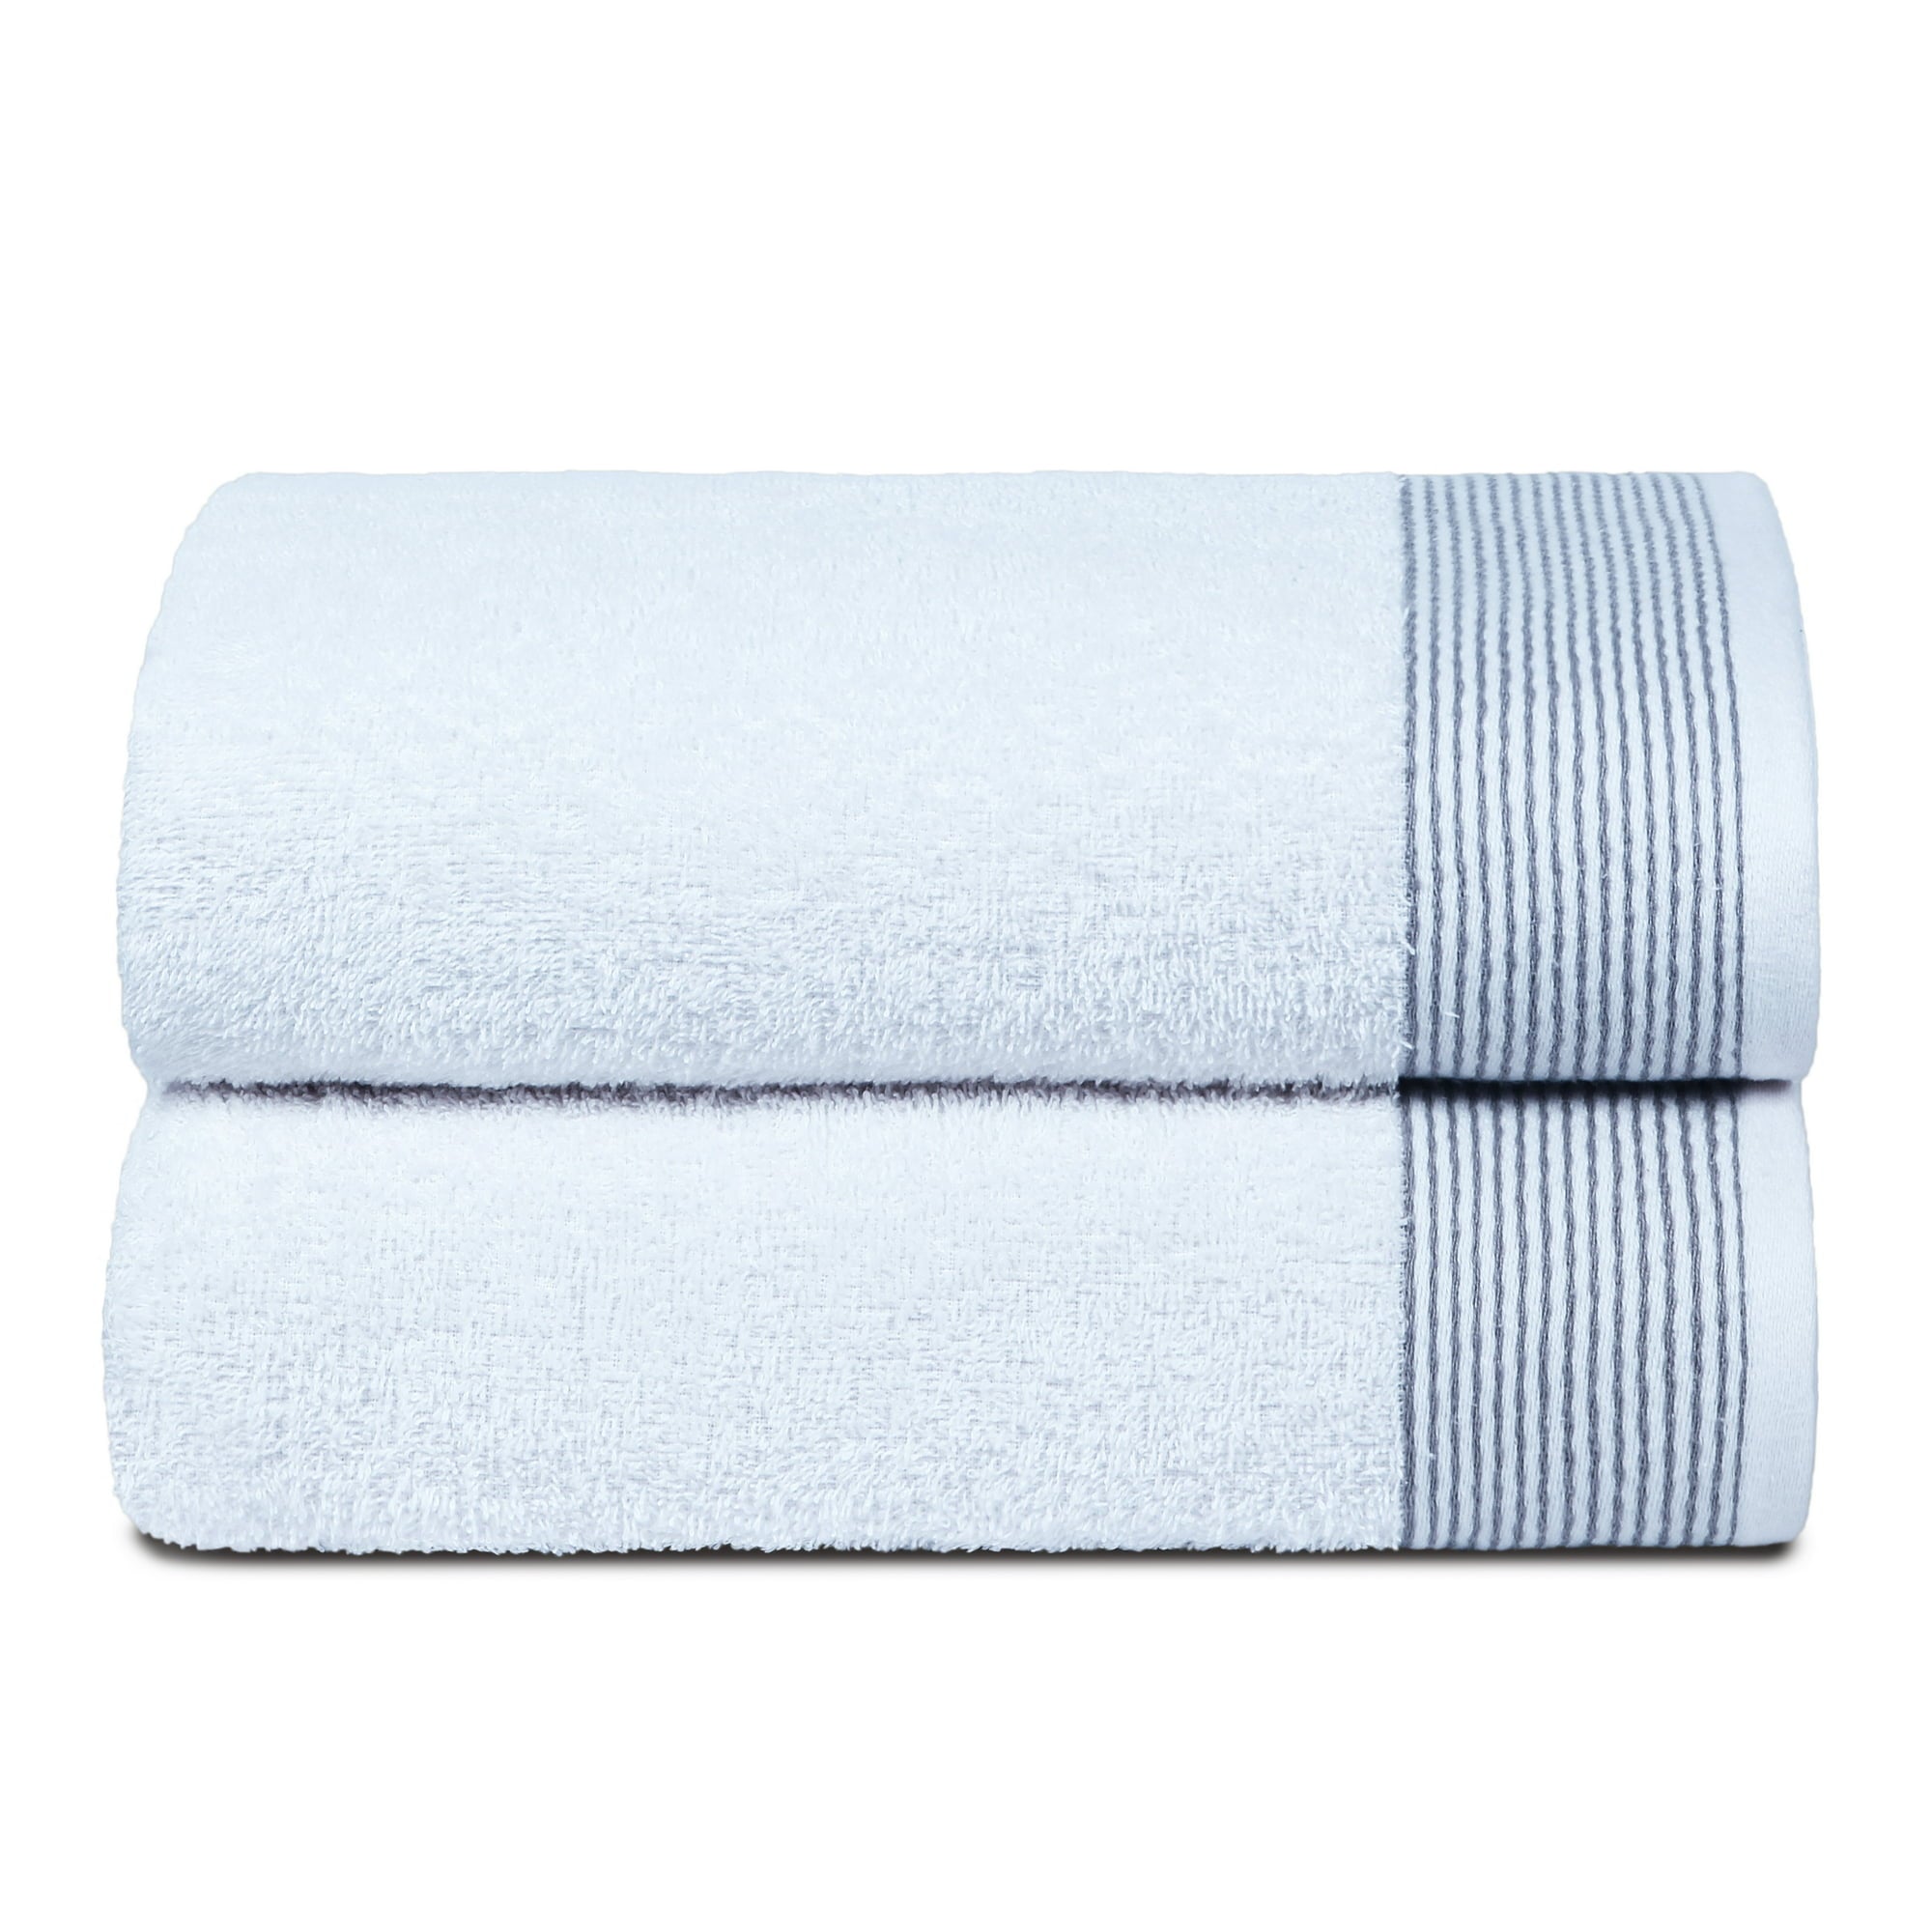 GLAMBURG Ultra Soft Oversized 2 Pack Bath Towel Set 28x55 inches, 100% Cotton Large Bath Towels, Highly Absorbant Compact Quickdry & Lightweight Towel, Ideal for Gym Travel Camp Pool - White